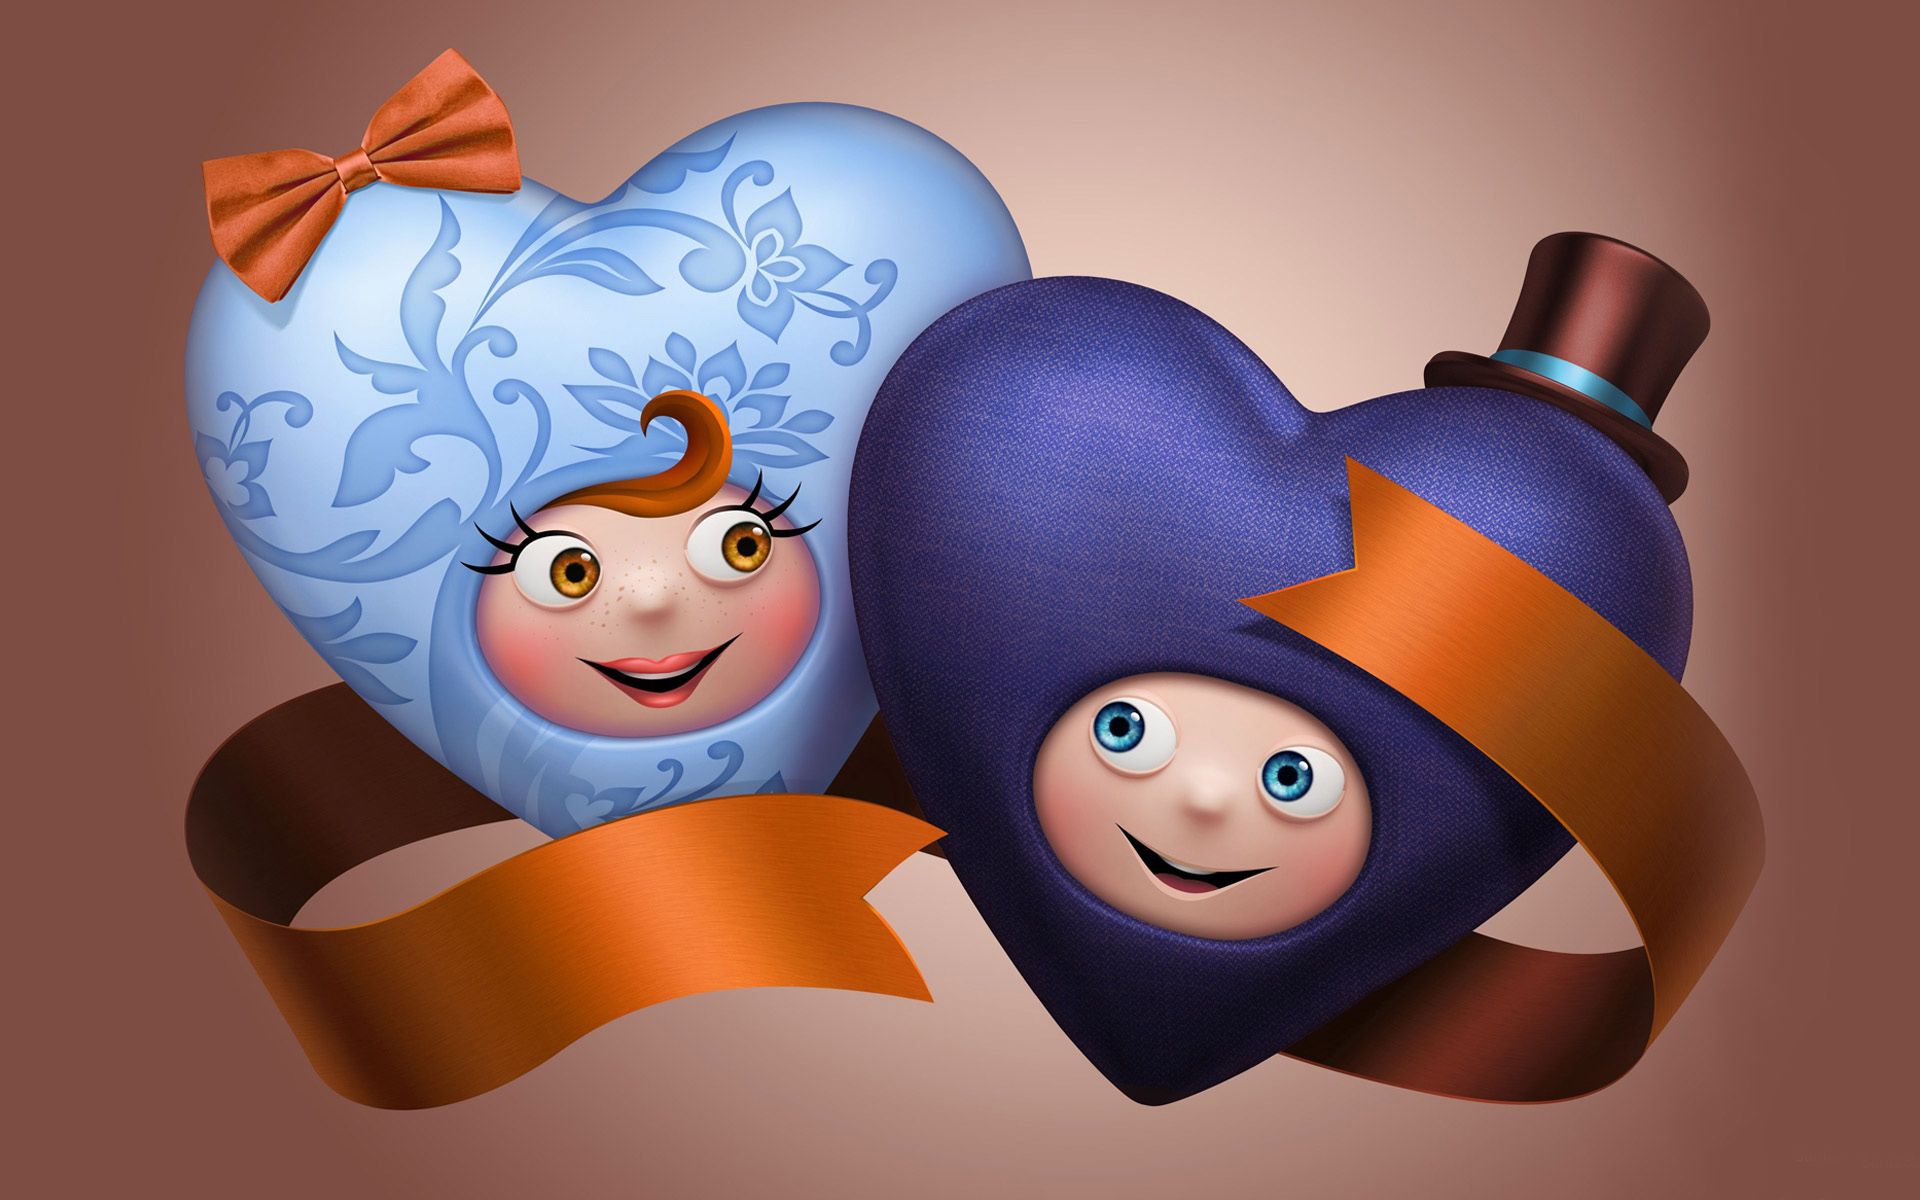 Download Animated Cute Love Wallpaper For Iphone #oKU0B ...